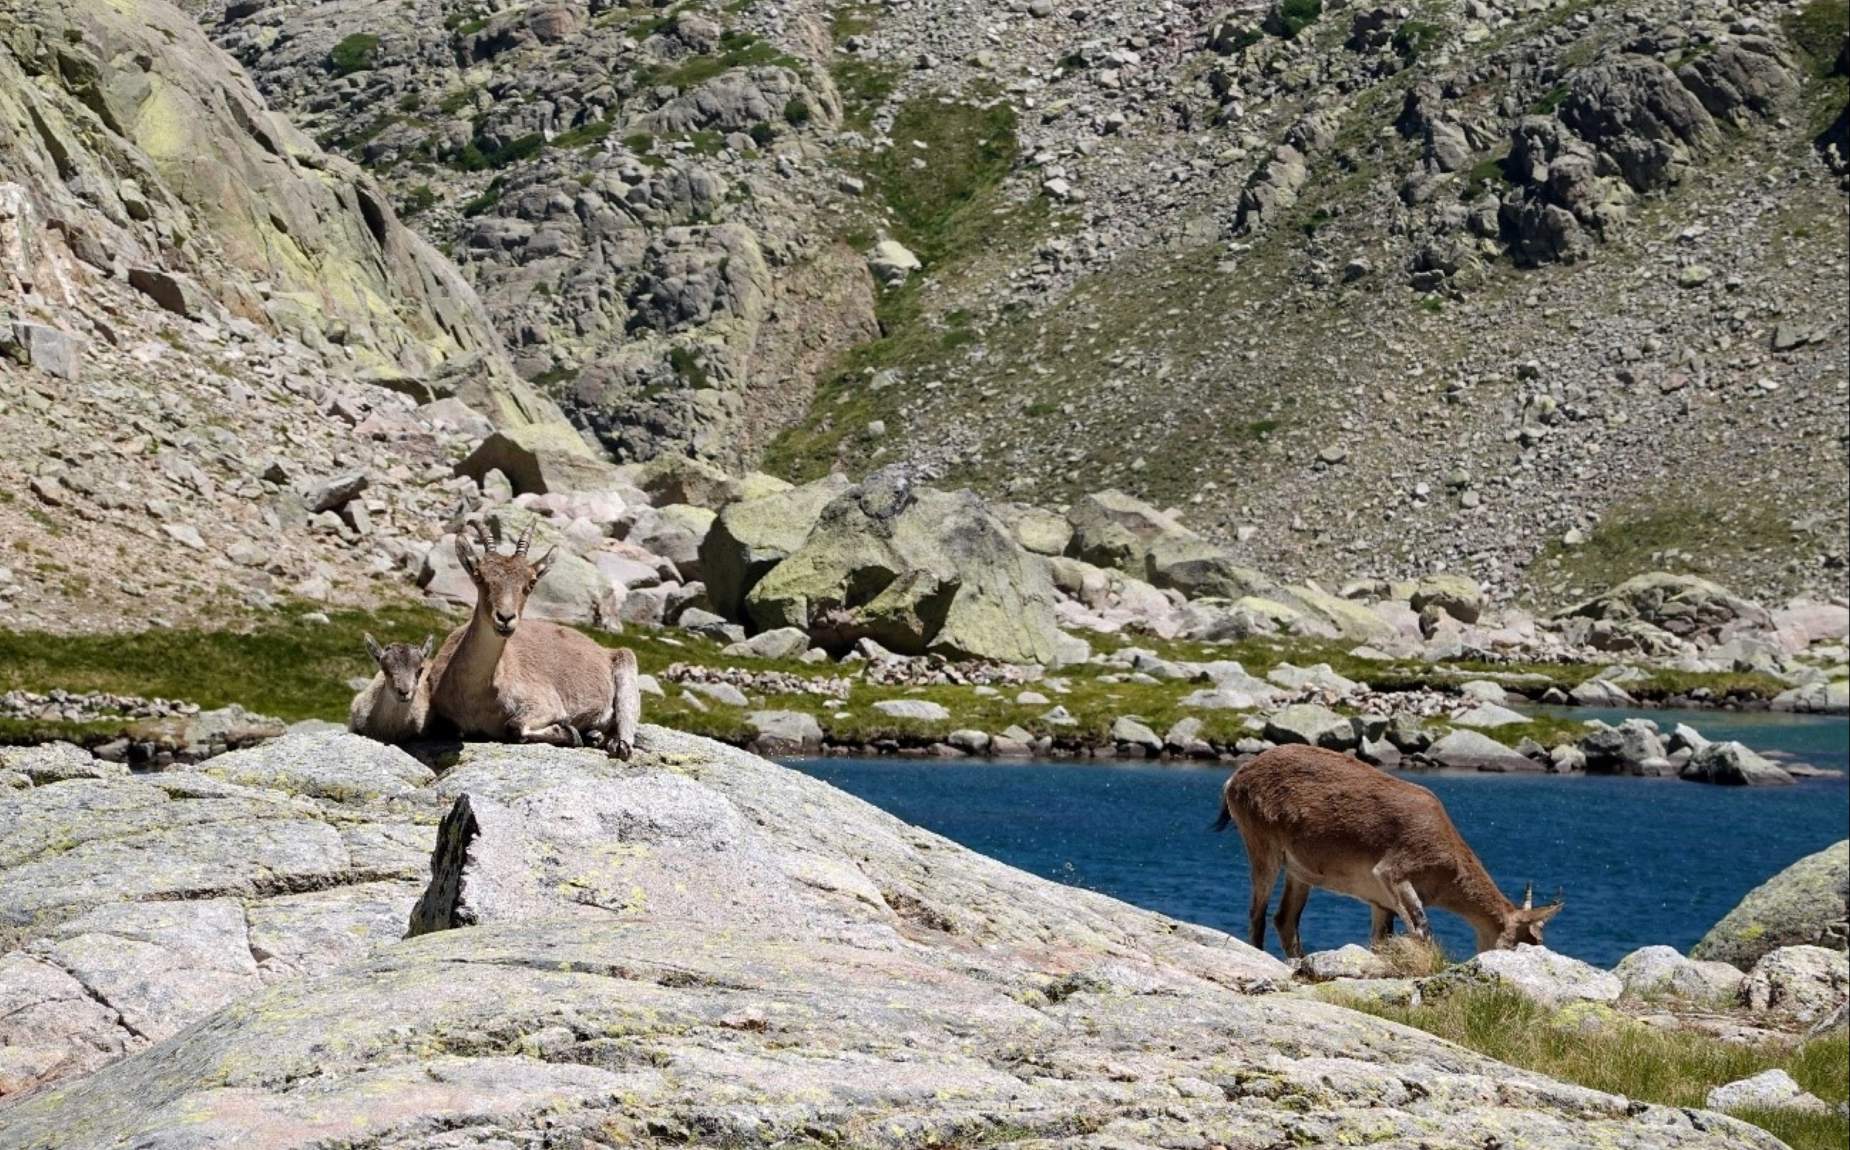 Several deer in one of the lakes of the mountain range